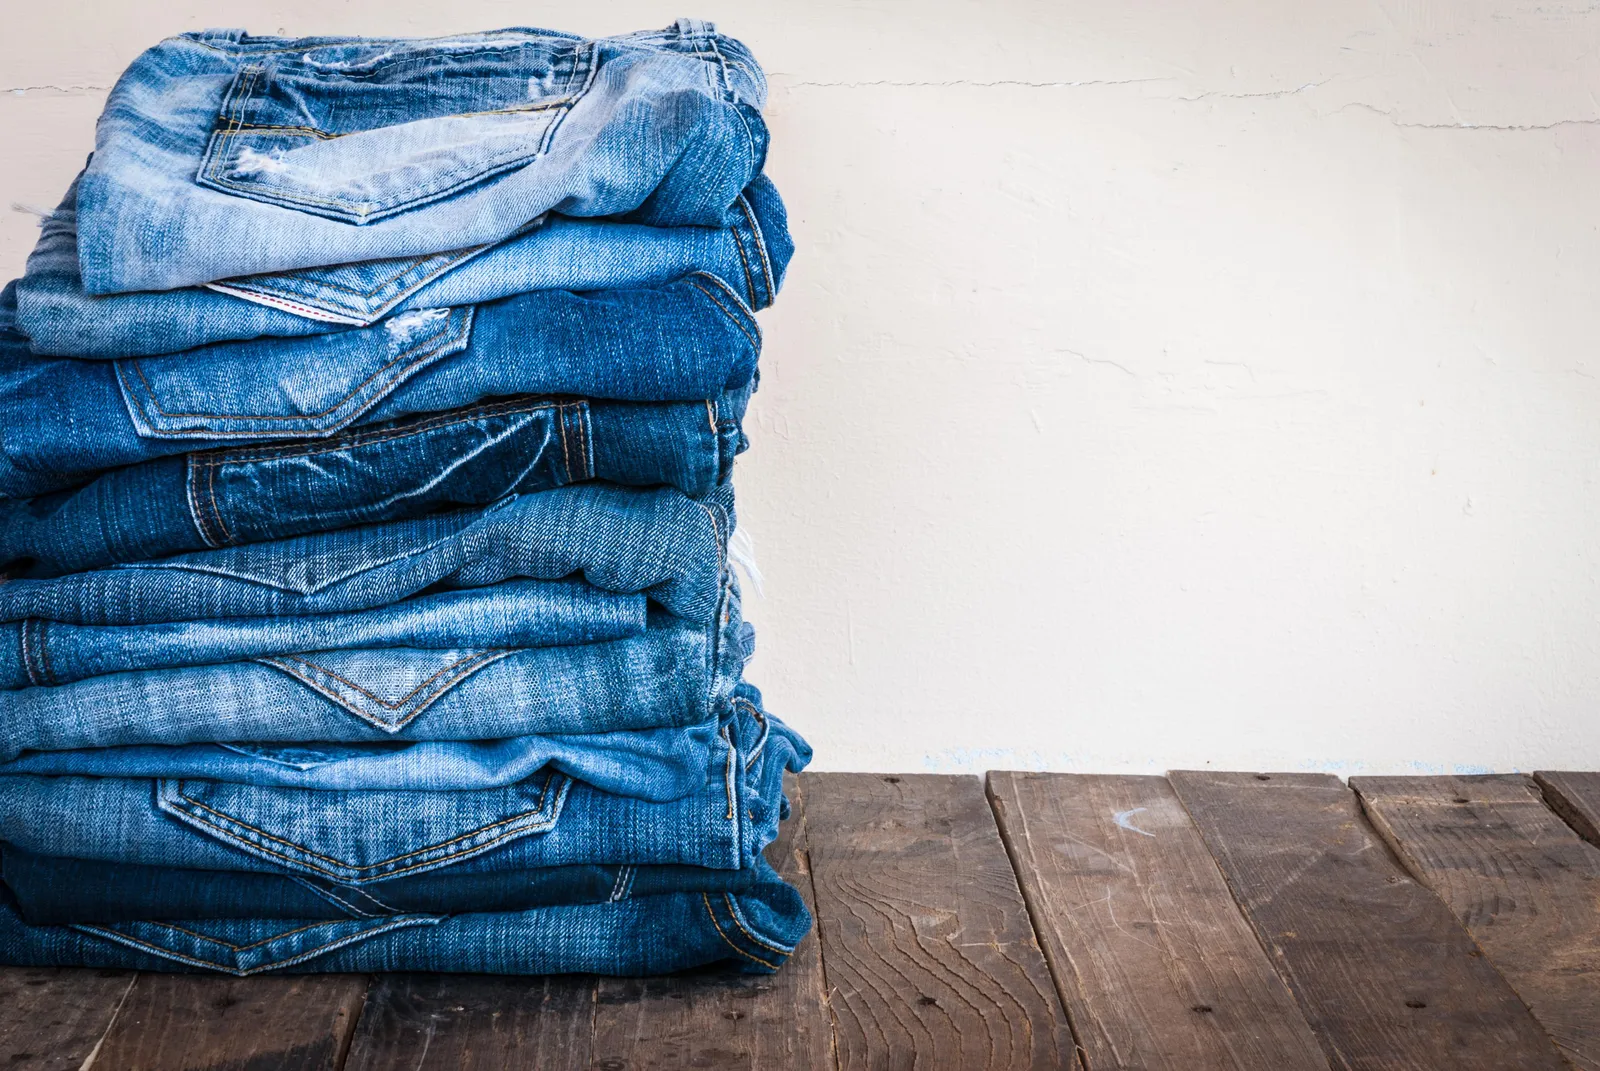 Have Scientists Found a Greener Way to Make Blue Jeans?, Innovation